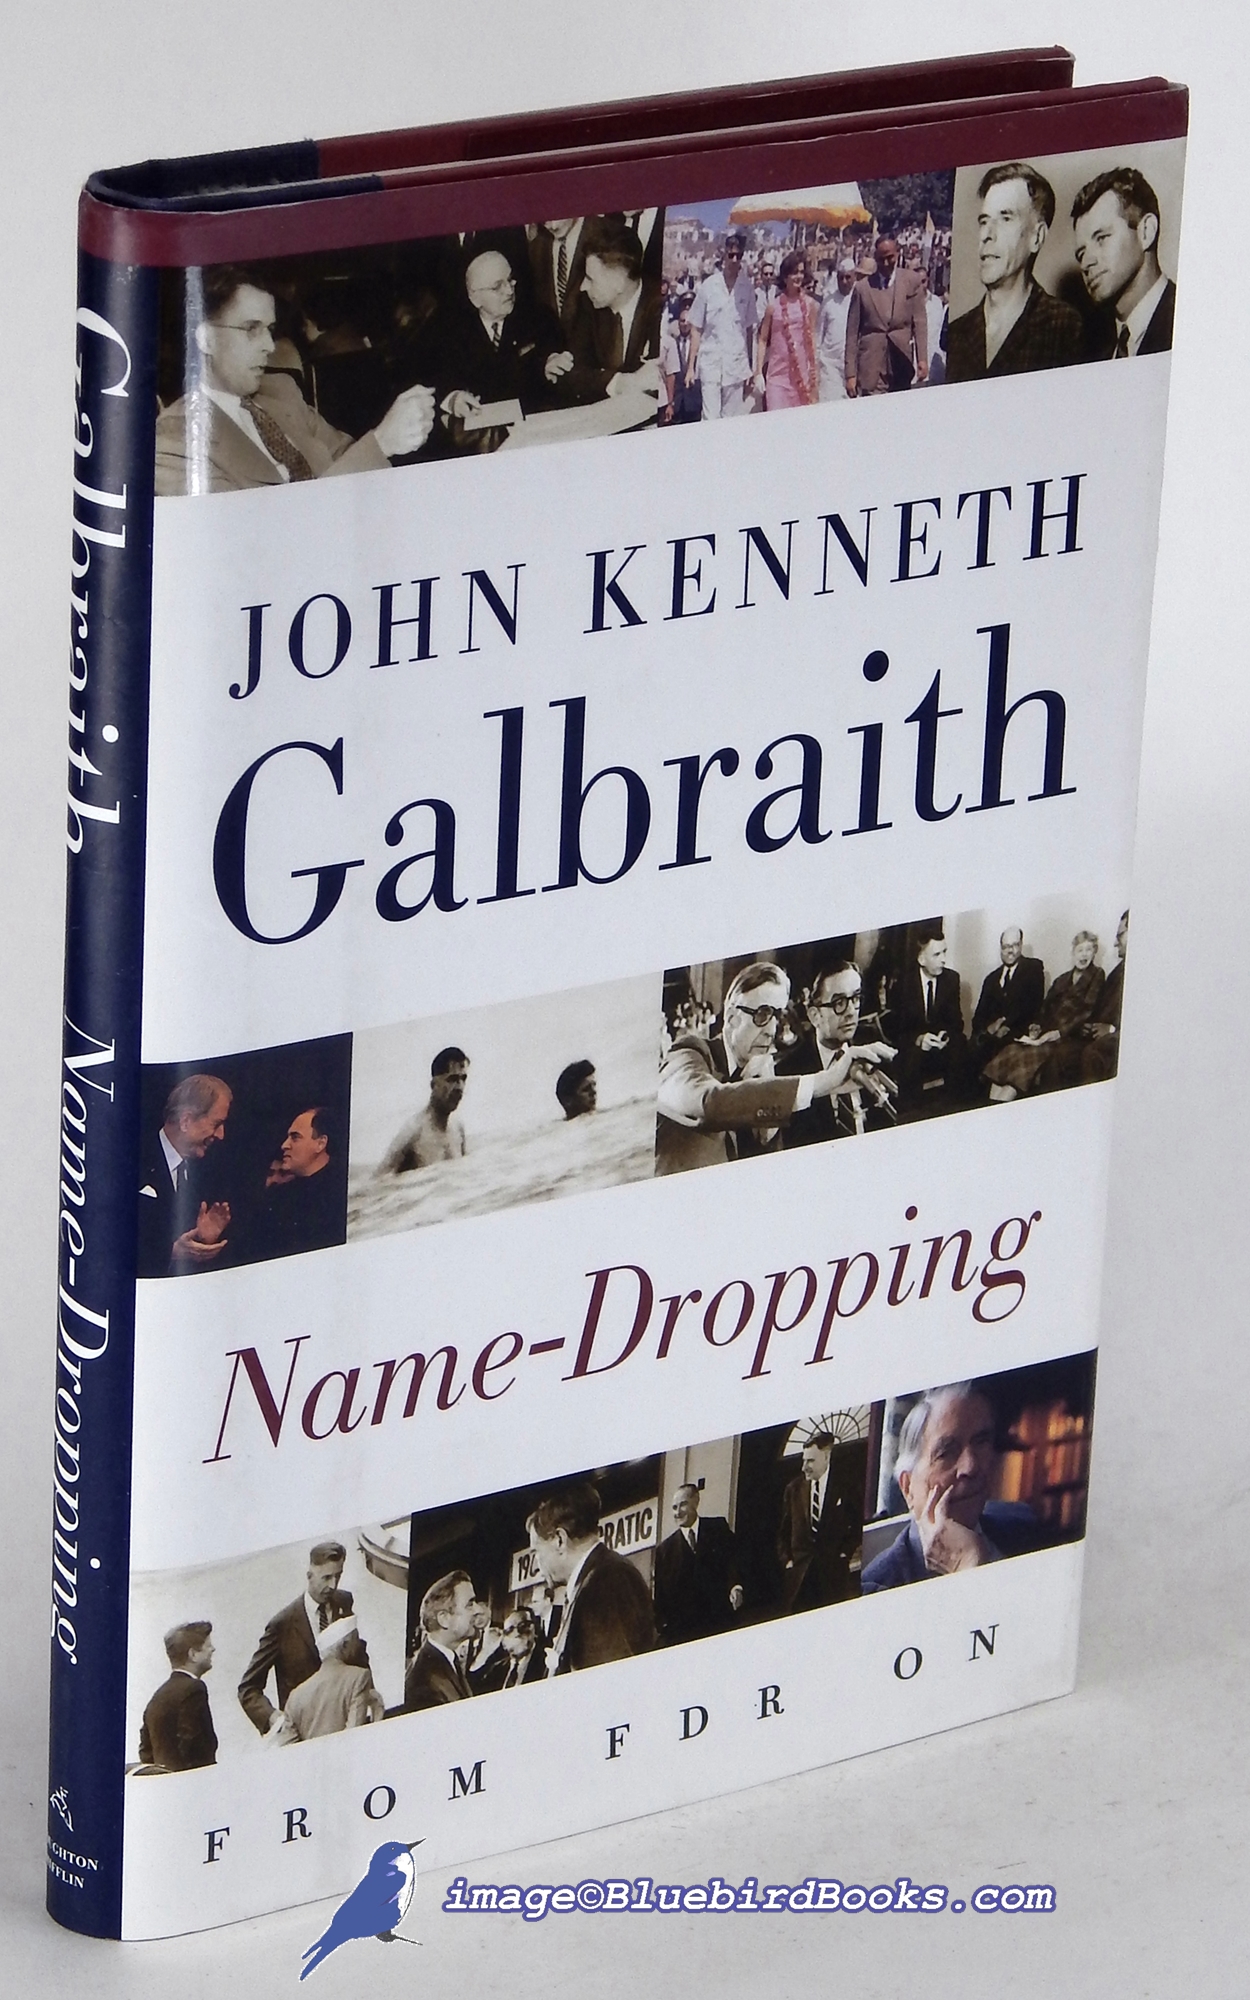 GALBRAITH, JOHN KENNETH - Name-Dropping: From F.D. R. On